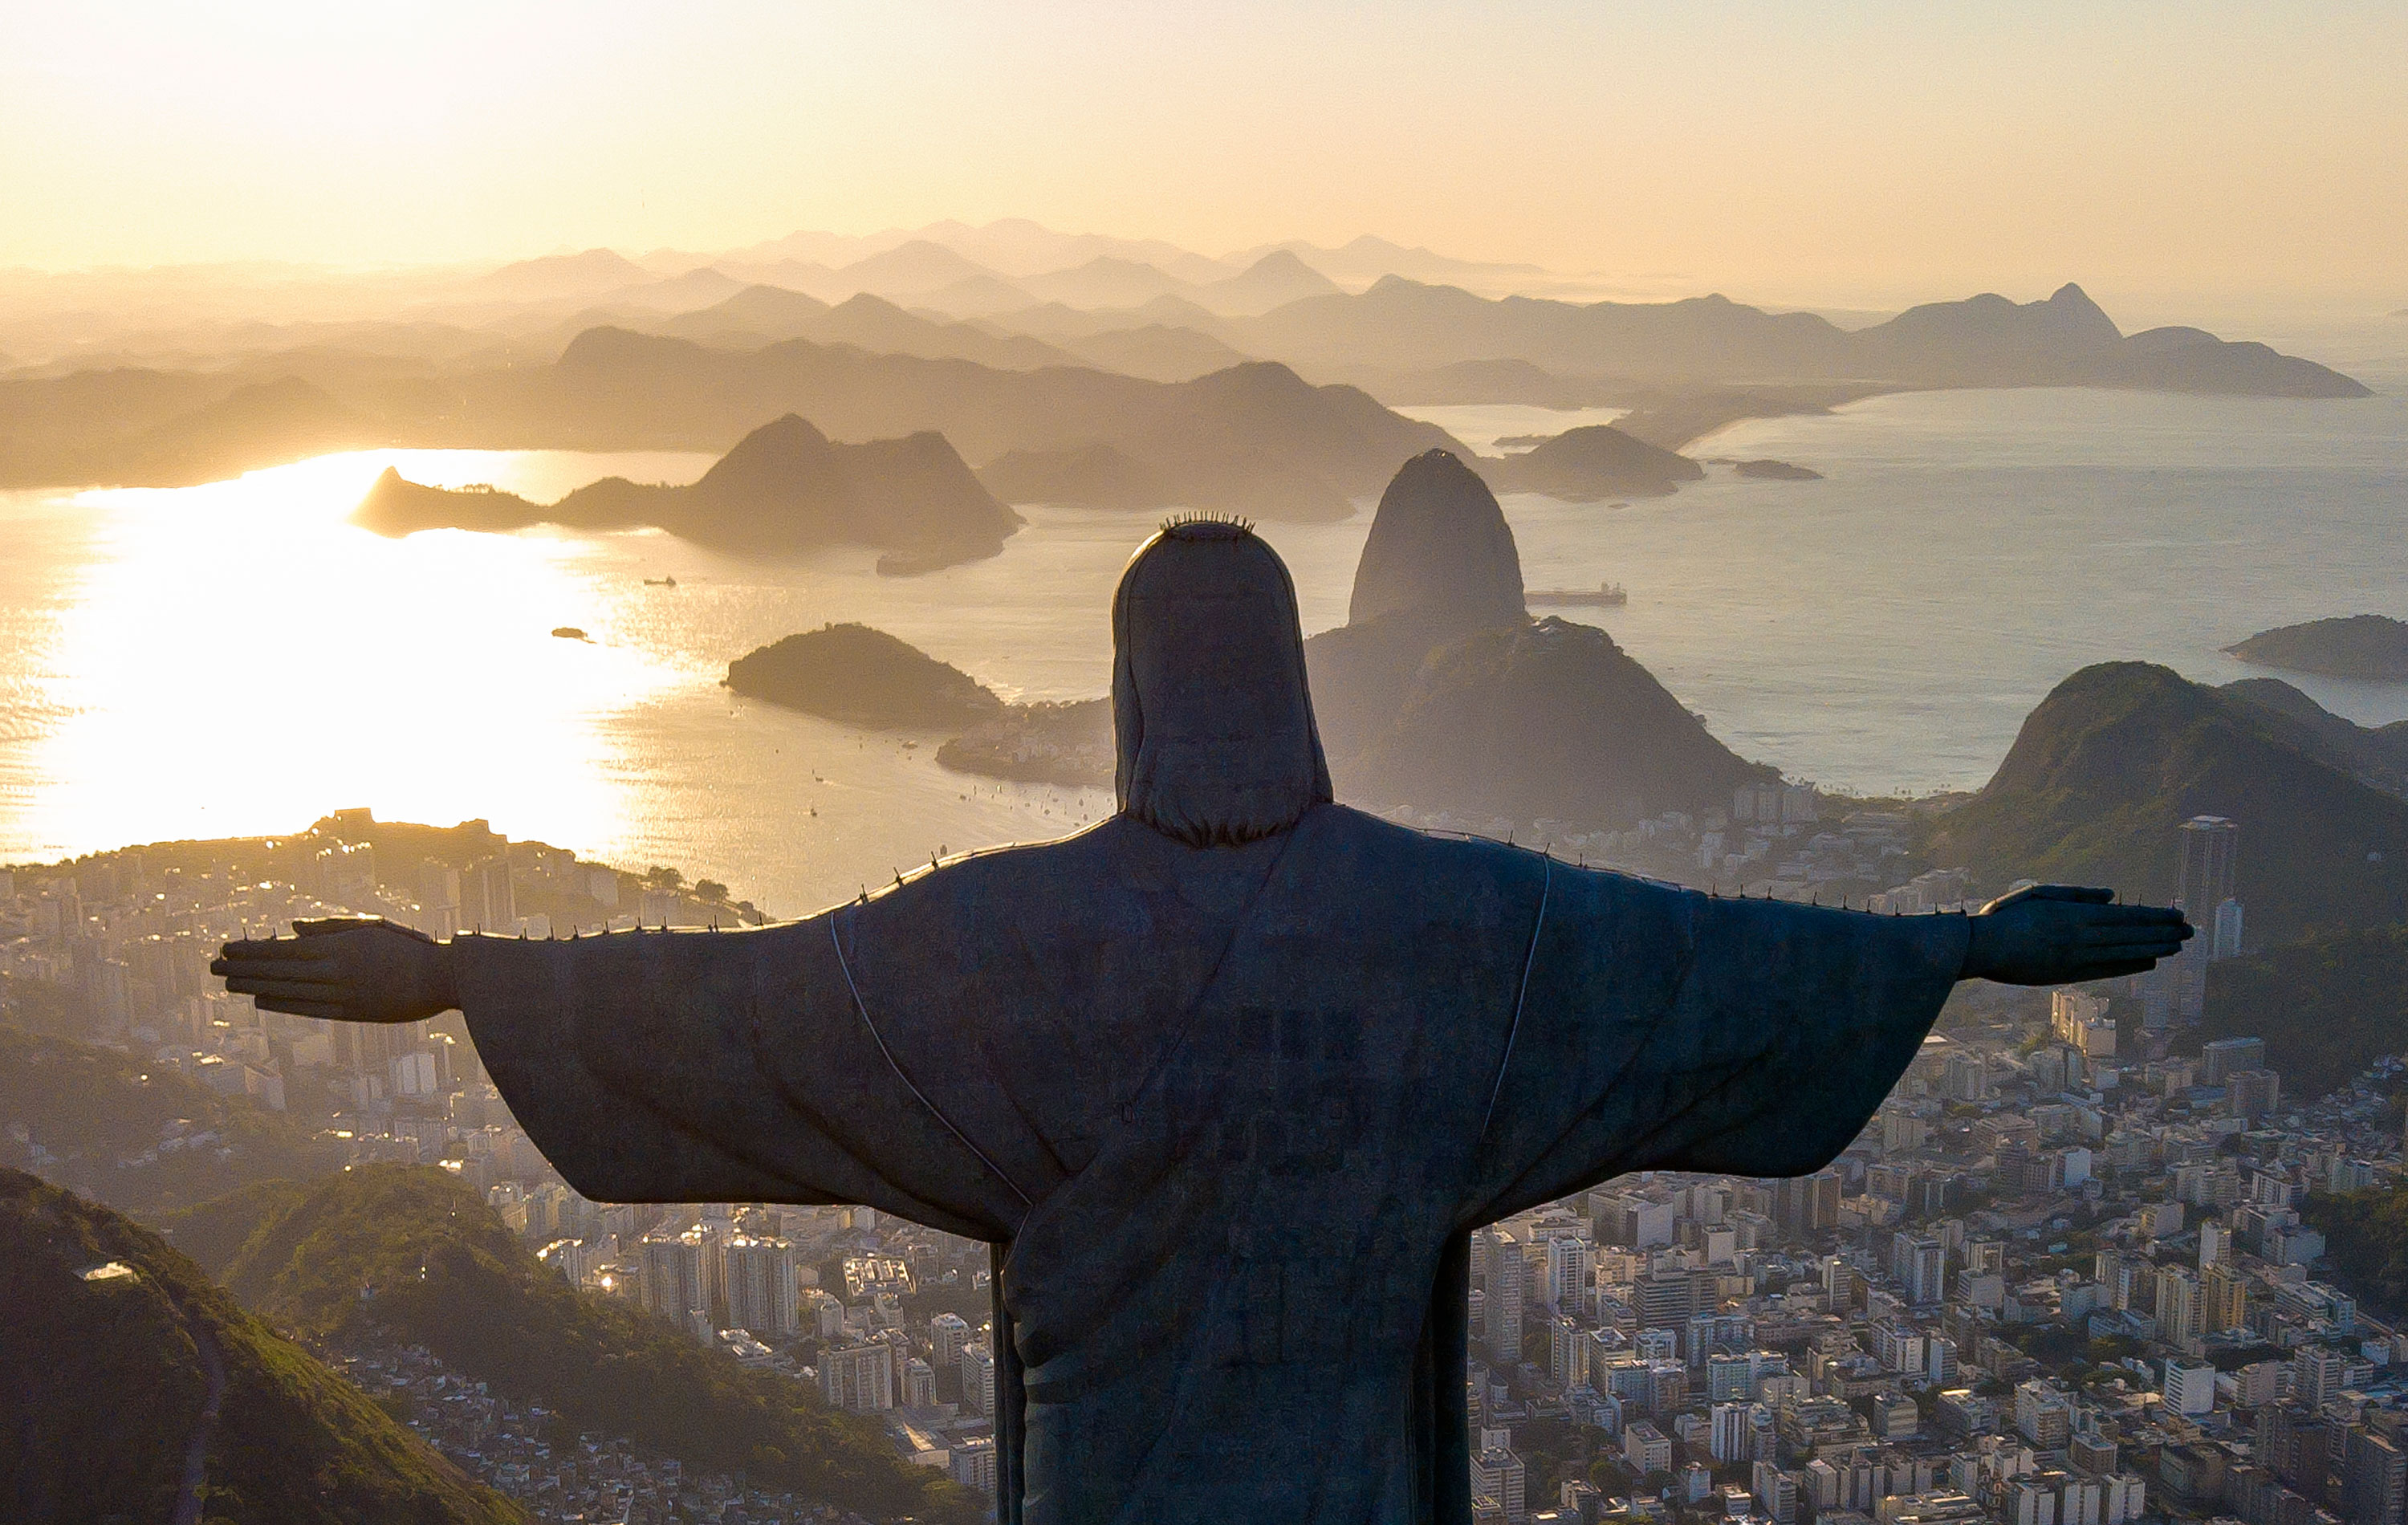 Christ the Redeemer is seen on August 15.